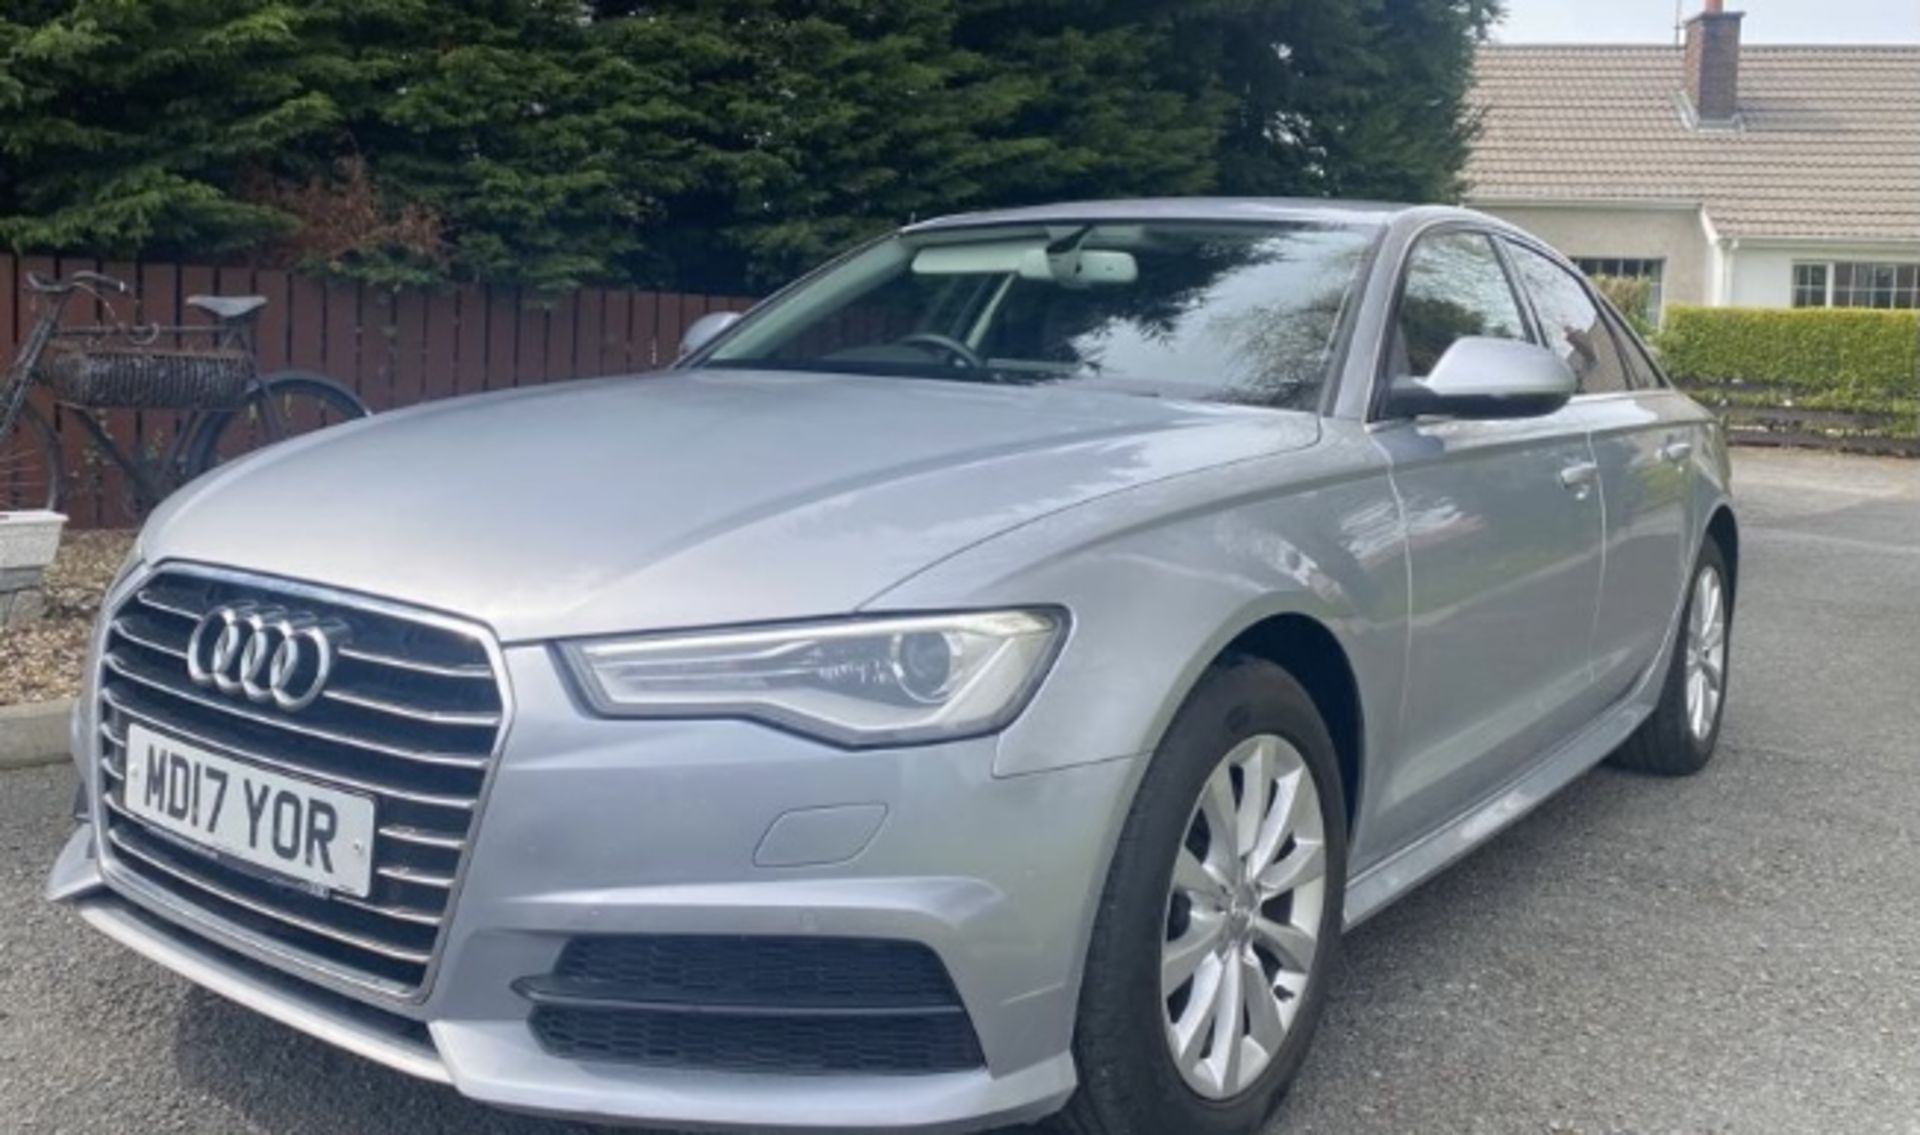 AUDI A6 ULTRA 2017 LOCATION NORTHERN IRELAND. - Image 2 of 6